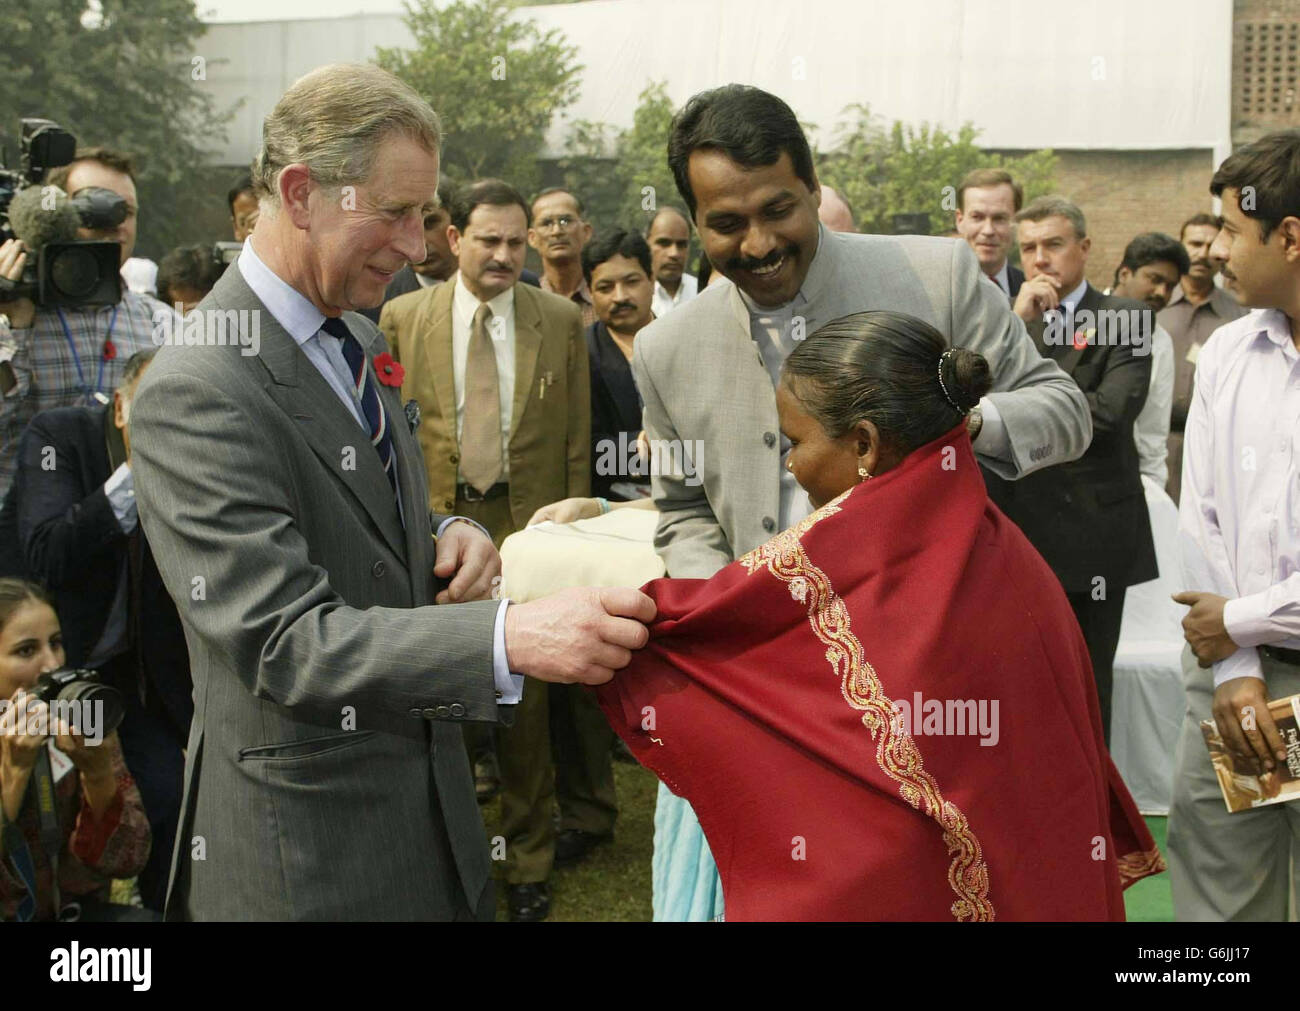 The Prince of Wales (left) meets Lali Bal (centre), who from the age of 12 was has worked as an untouchable who performs the degrading tasks of cleaning human waste from the homes of richer villagers, in Delhi, during his official visit to India. From the age of 12, Lali was forced to work from 5am until 11pm at night, carrying the excrement in a basket on her head for two kilometres to dispose of it. Stock Photo